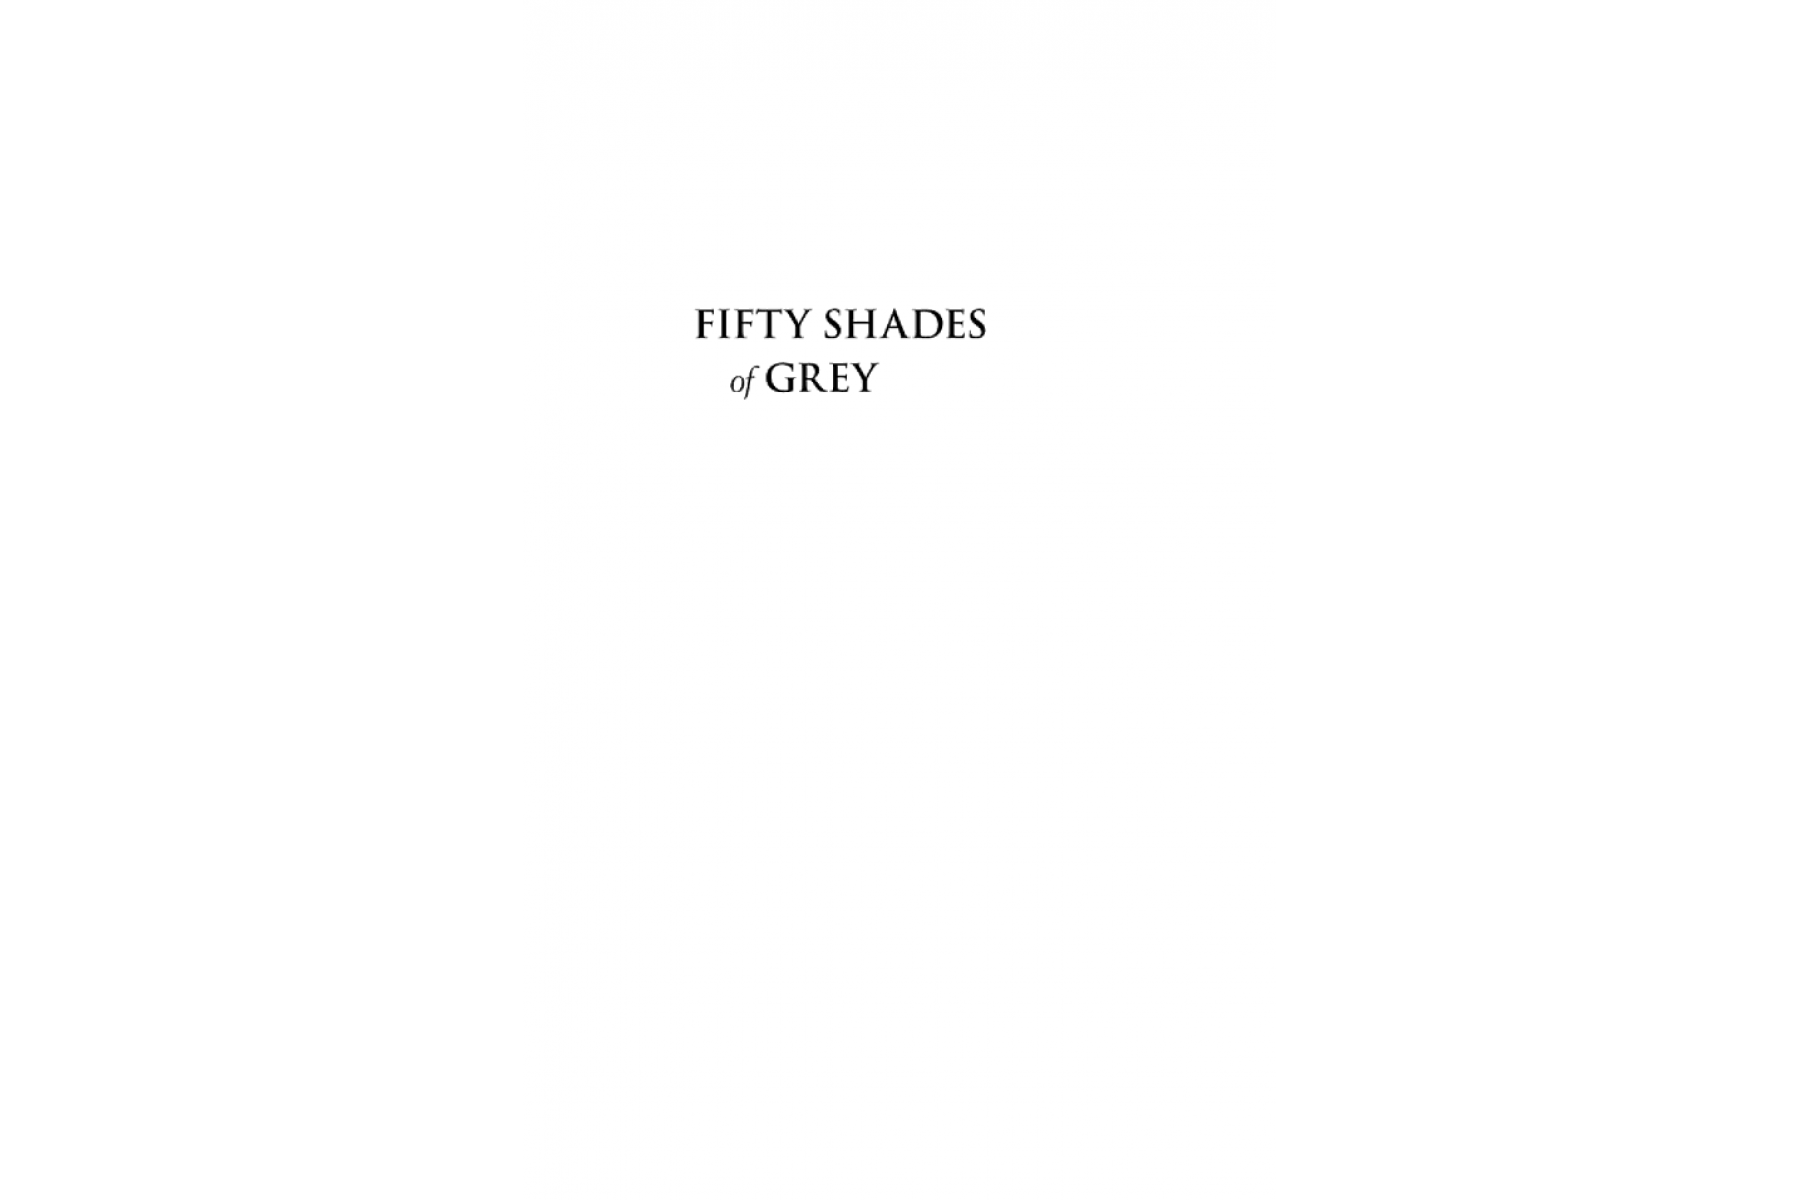 Fifty Shades of Grey: Movie Tie-in